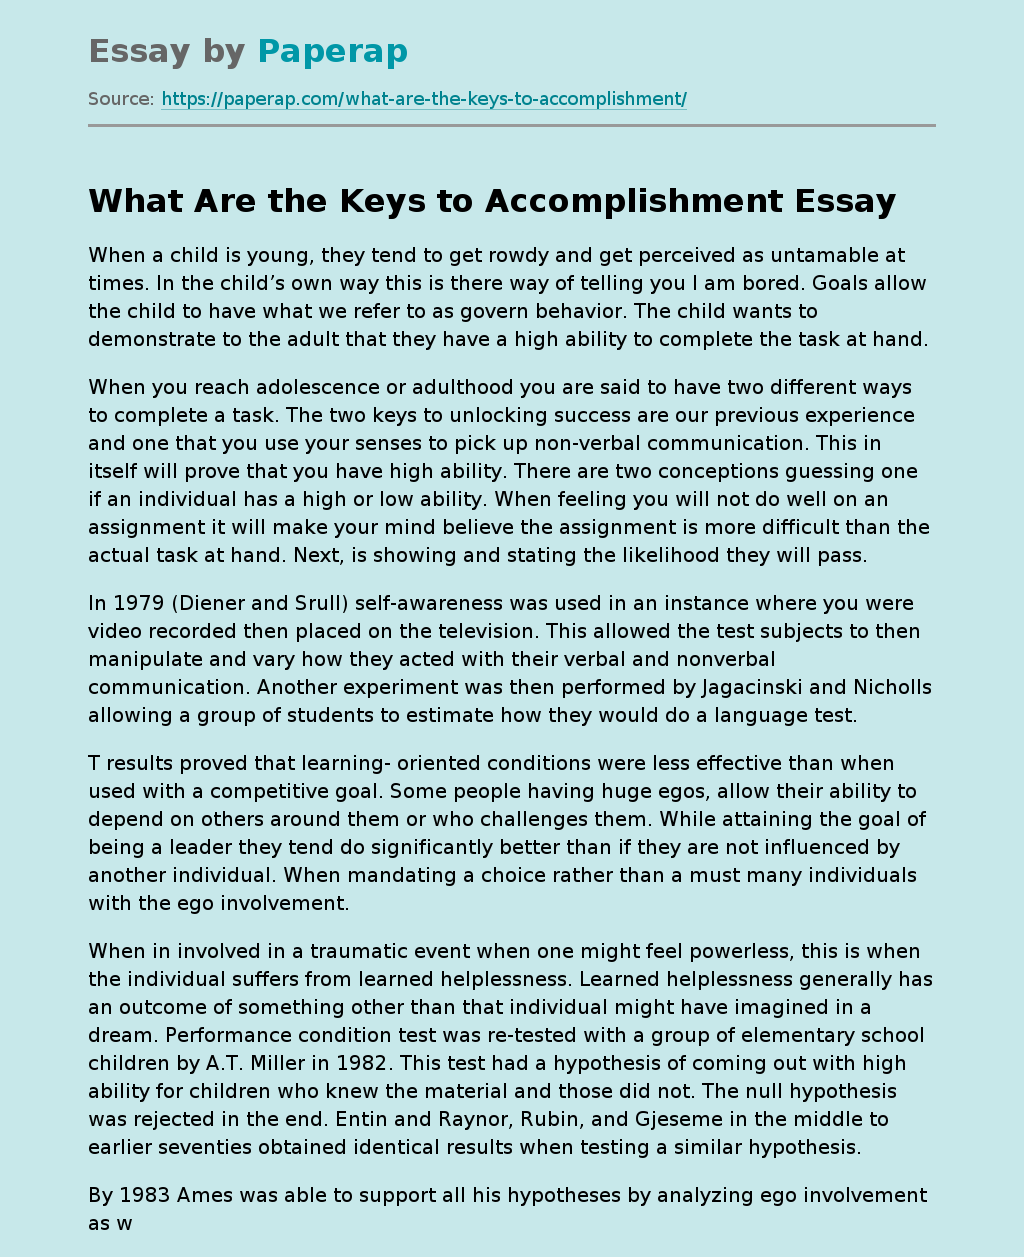 What Are the Keys to Accomplishment